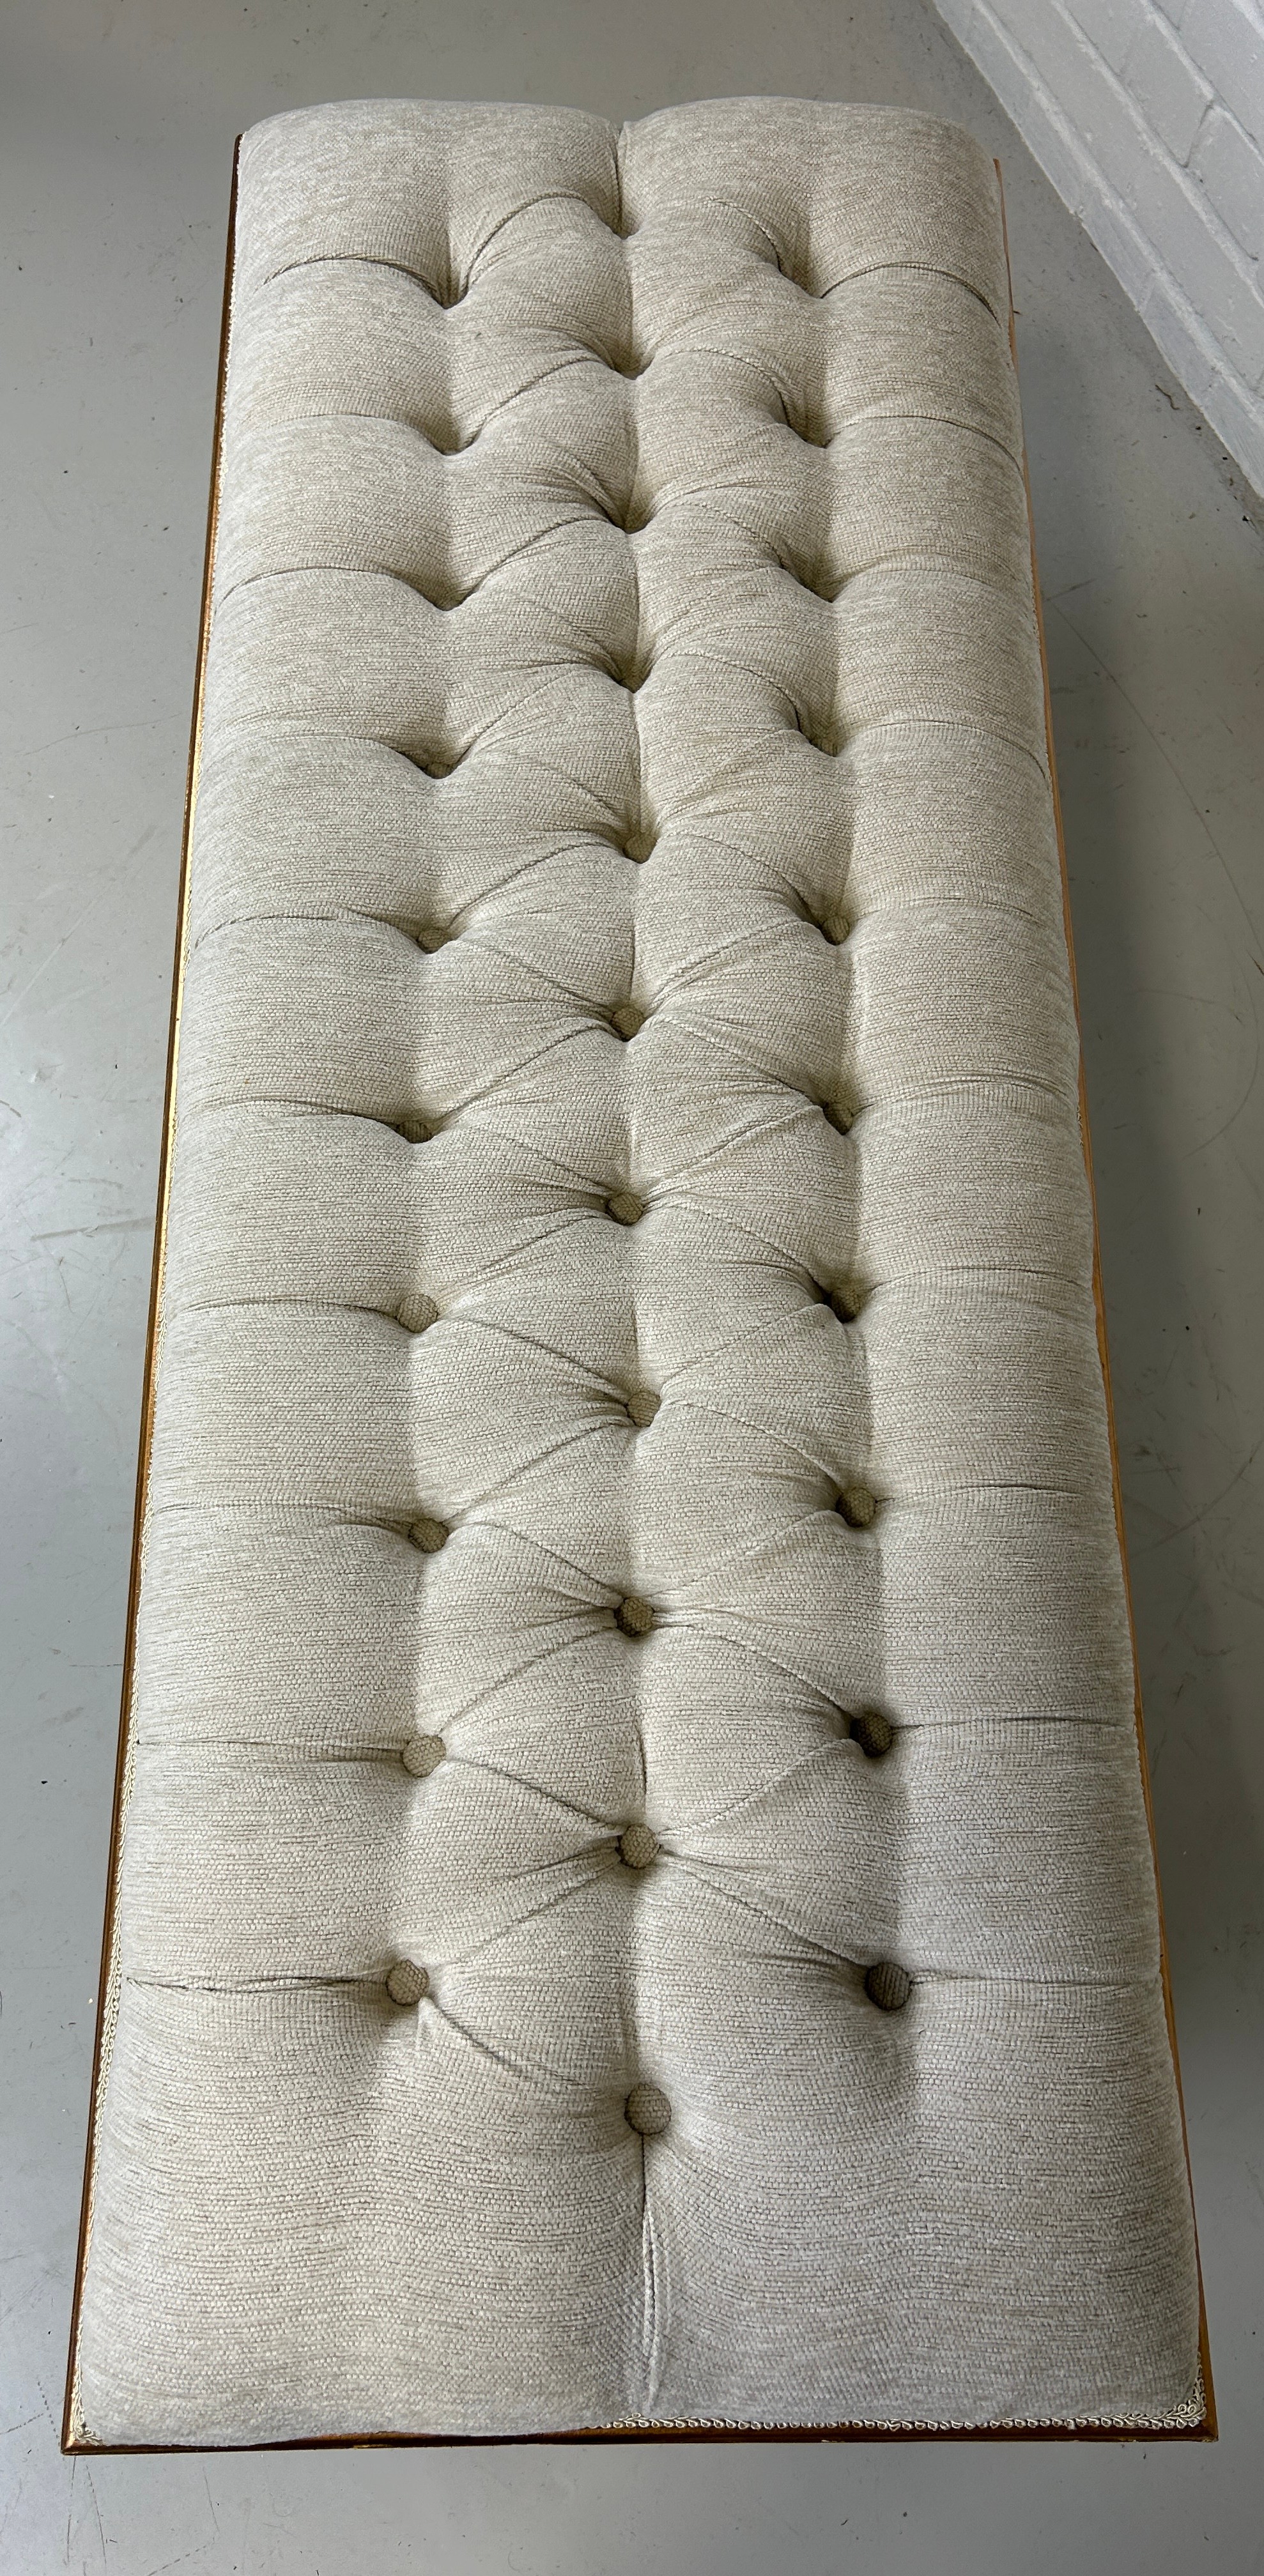 A MODERN EMPIRE STYLE FOOTSTOOL WITH CREAM UPHOLSTERED SEAT, 130cm x 50cm x 42cm - Image 4 of 4